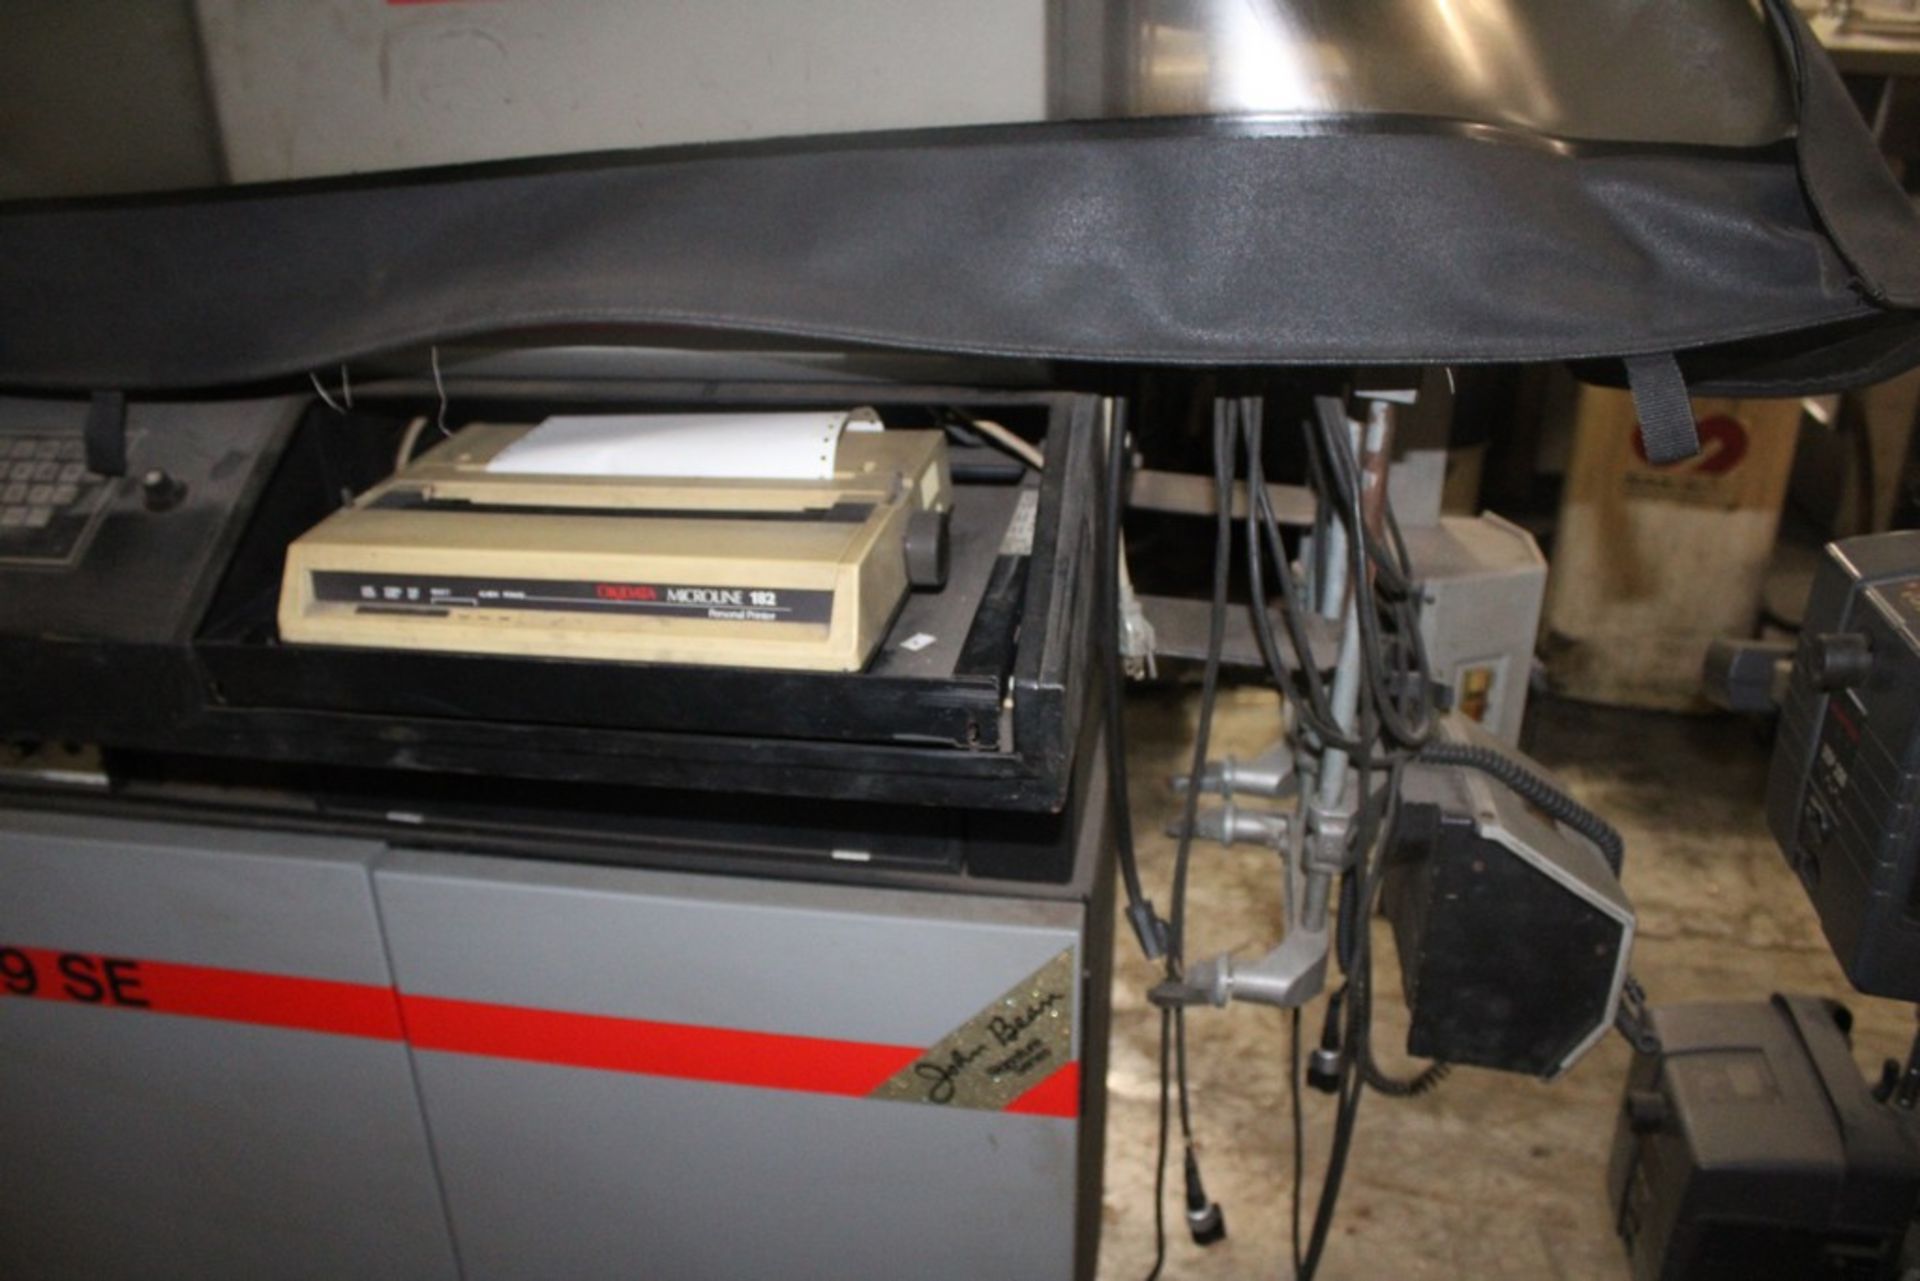 VISUALINER MODEL 9909 SE FOUR WHEEL COMPUTER ALIGNMENT SYSTEM - Image 2 of 4